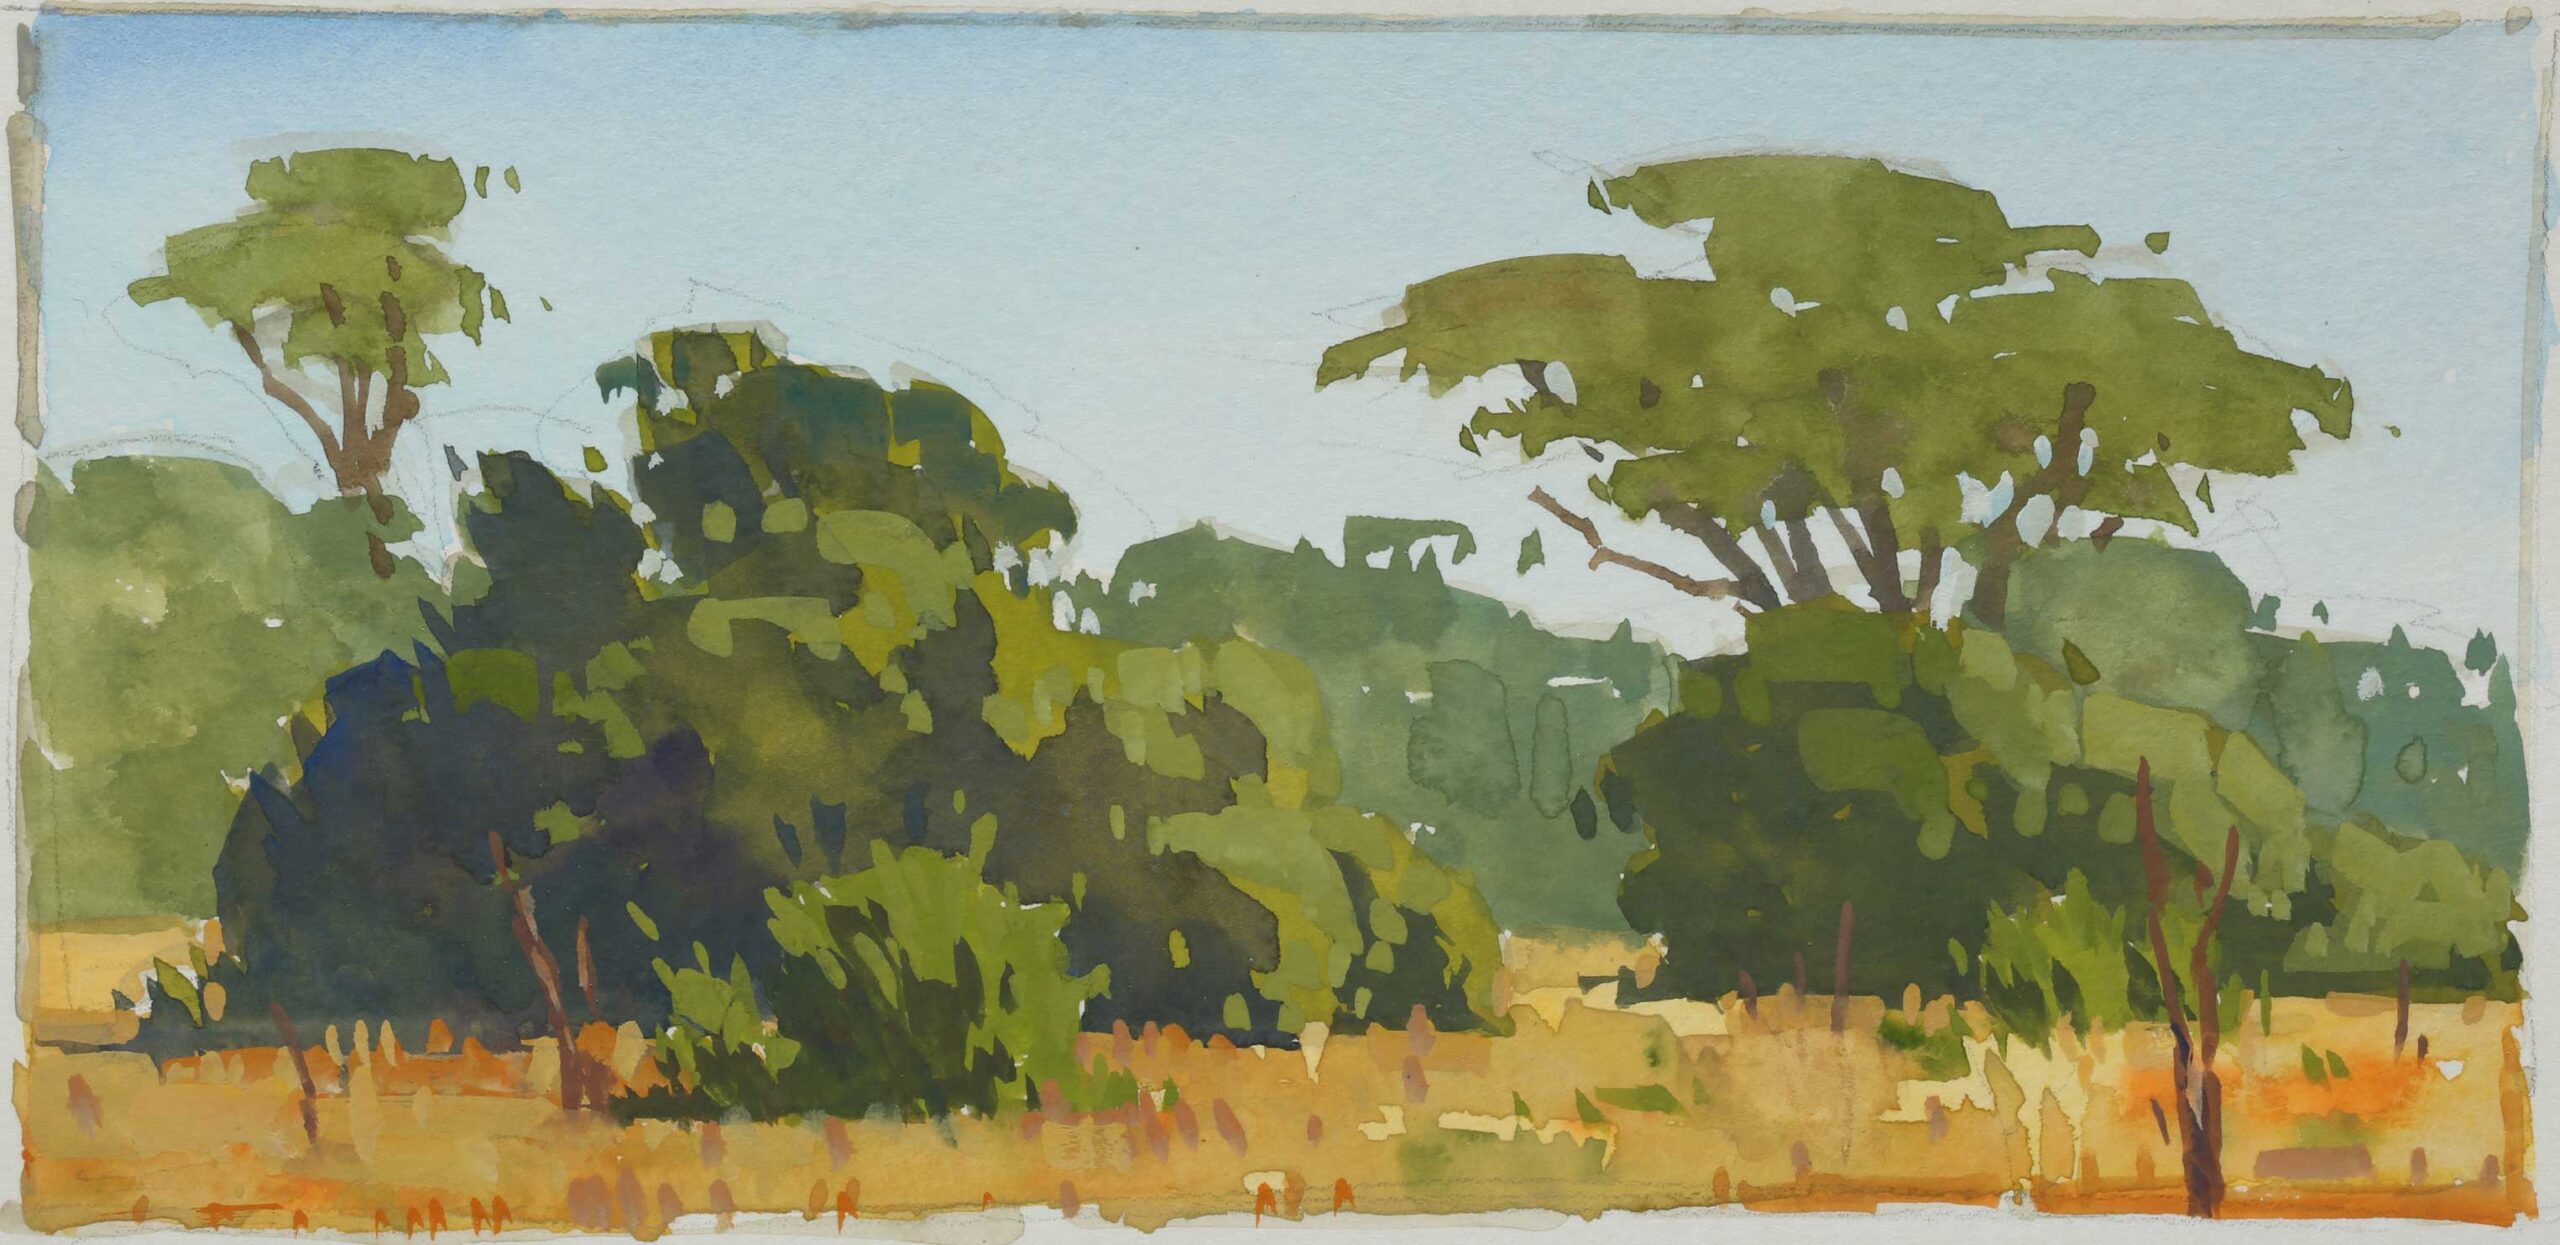 Paul Kratter, "Trees Along the Horizon," 2019, gouache, 3 x 6 1/2 in., collection the artist, plein air 